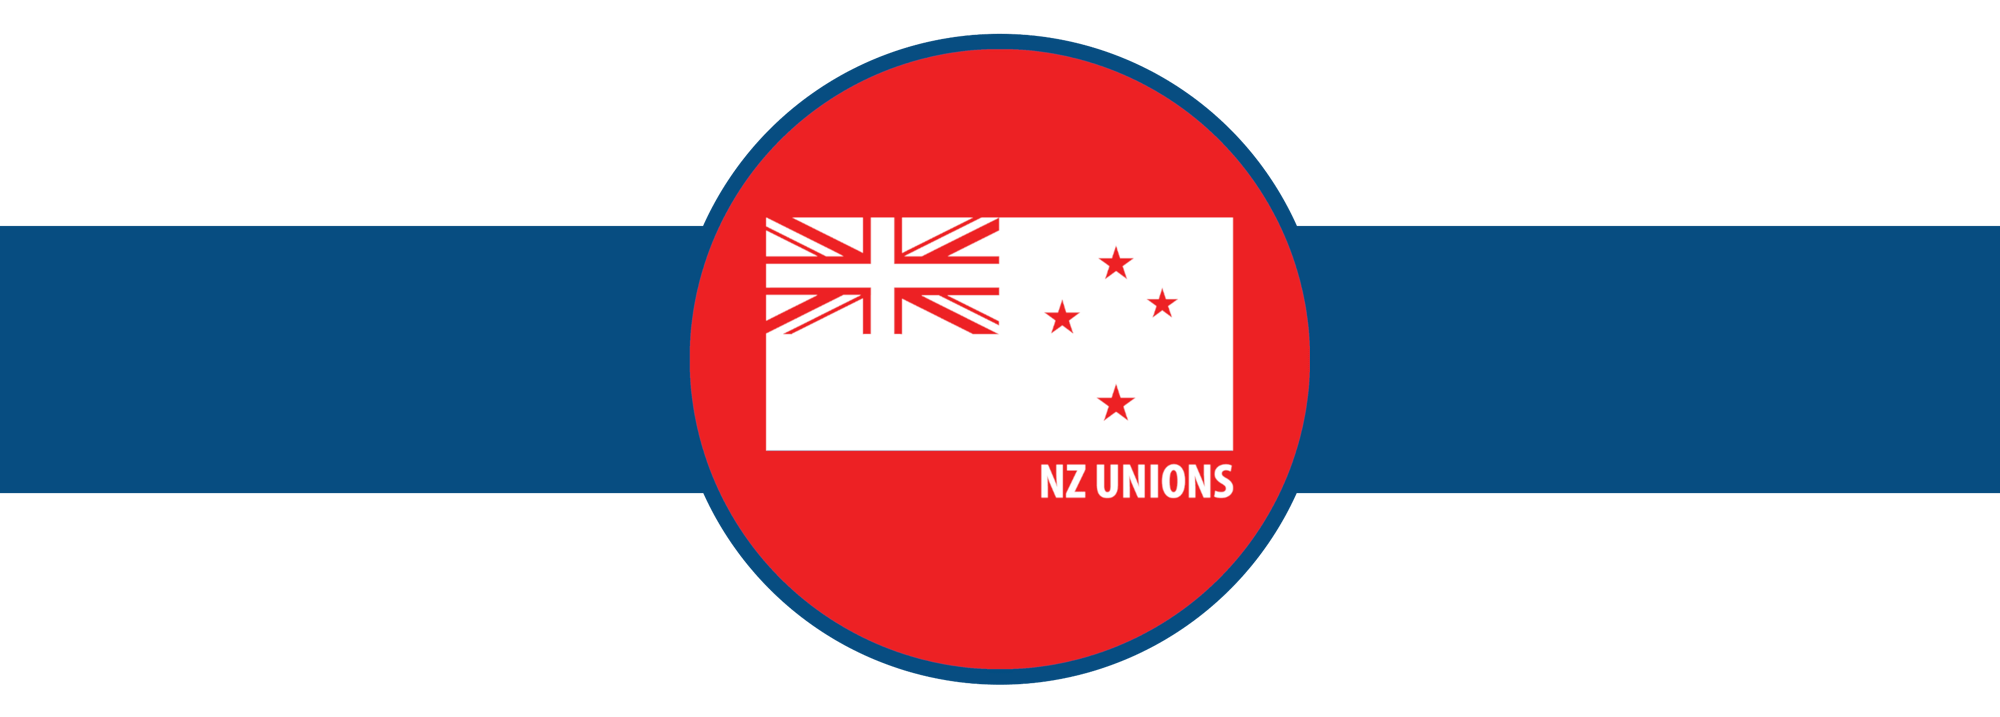 NZ Unions Home Background